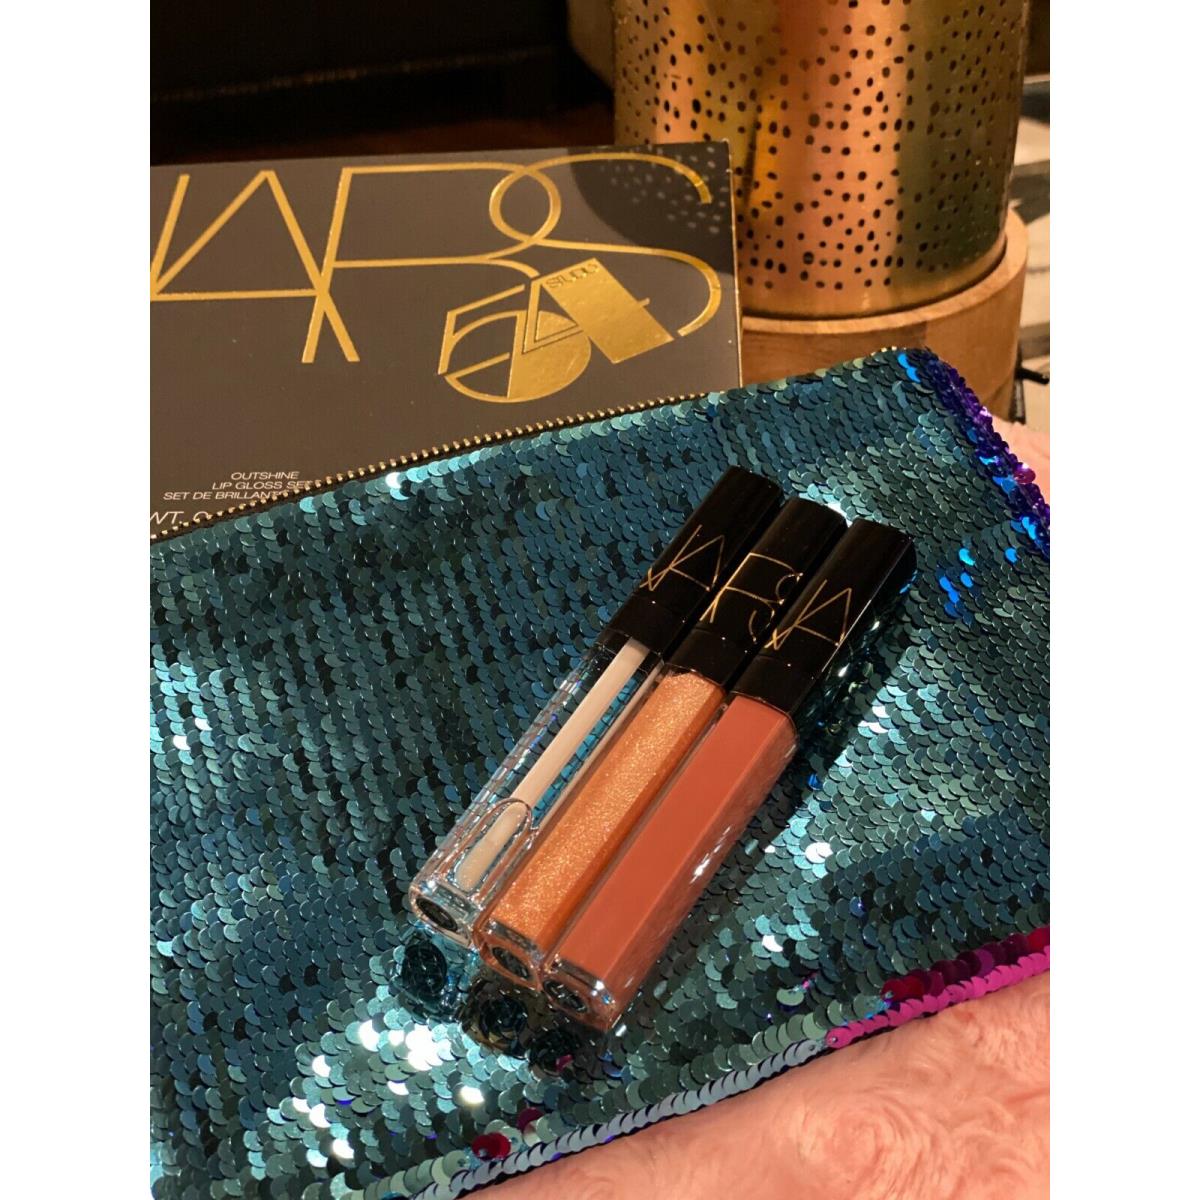 Nars Studio 54 Limited Ed. Outshine Lipgloss Set Sequin Clutch 3 Glosses